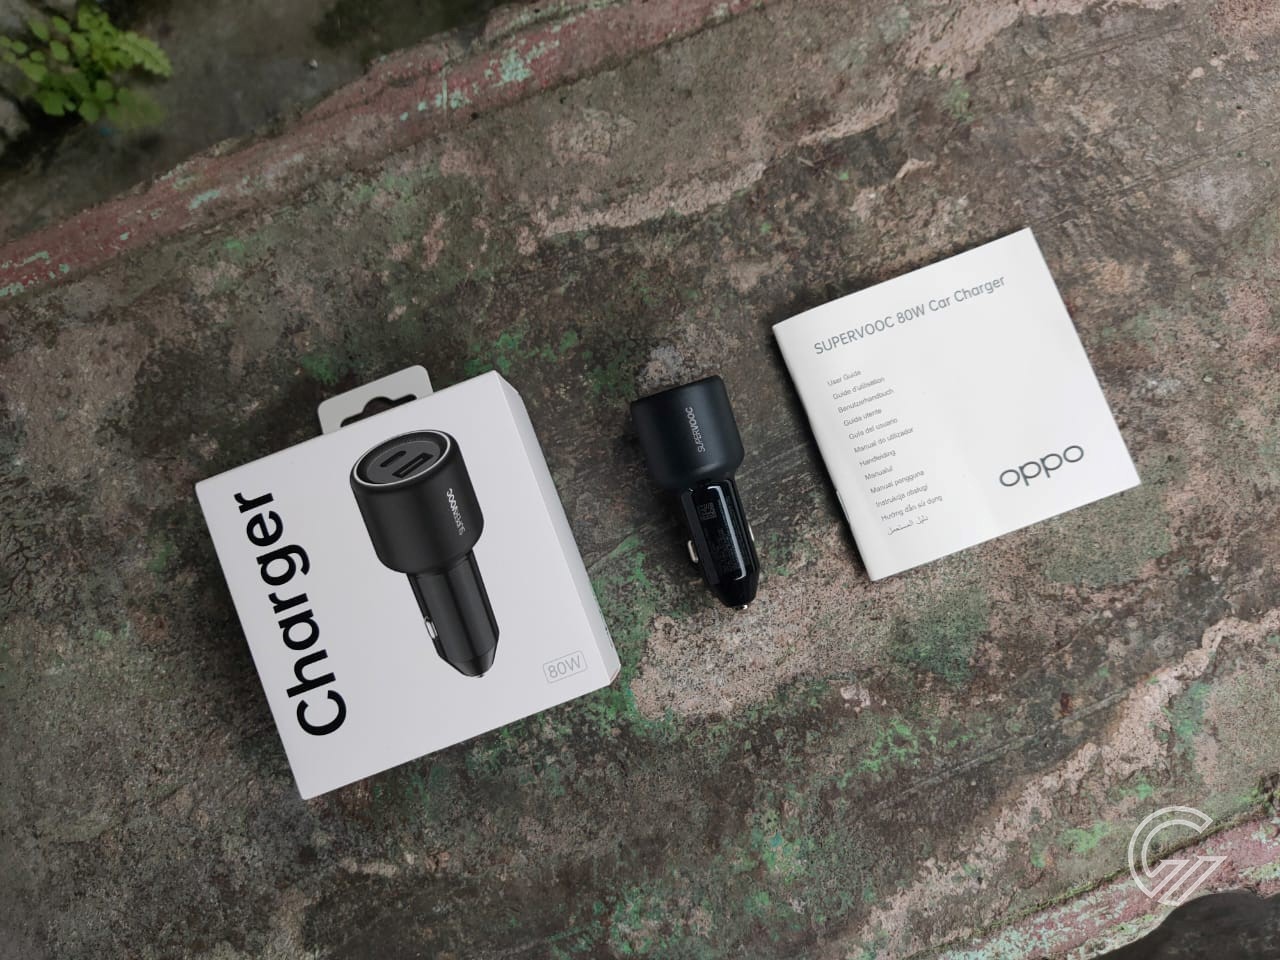 Review OPPO 80W SUPERVOOC Car Charger – Bisa Isi Daya Handphone OPPO Super Cepat 